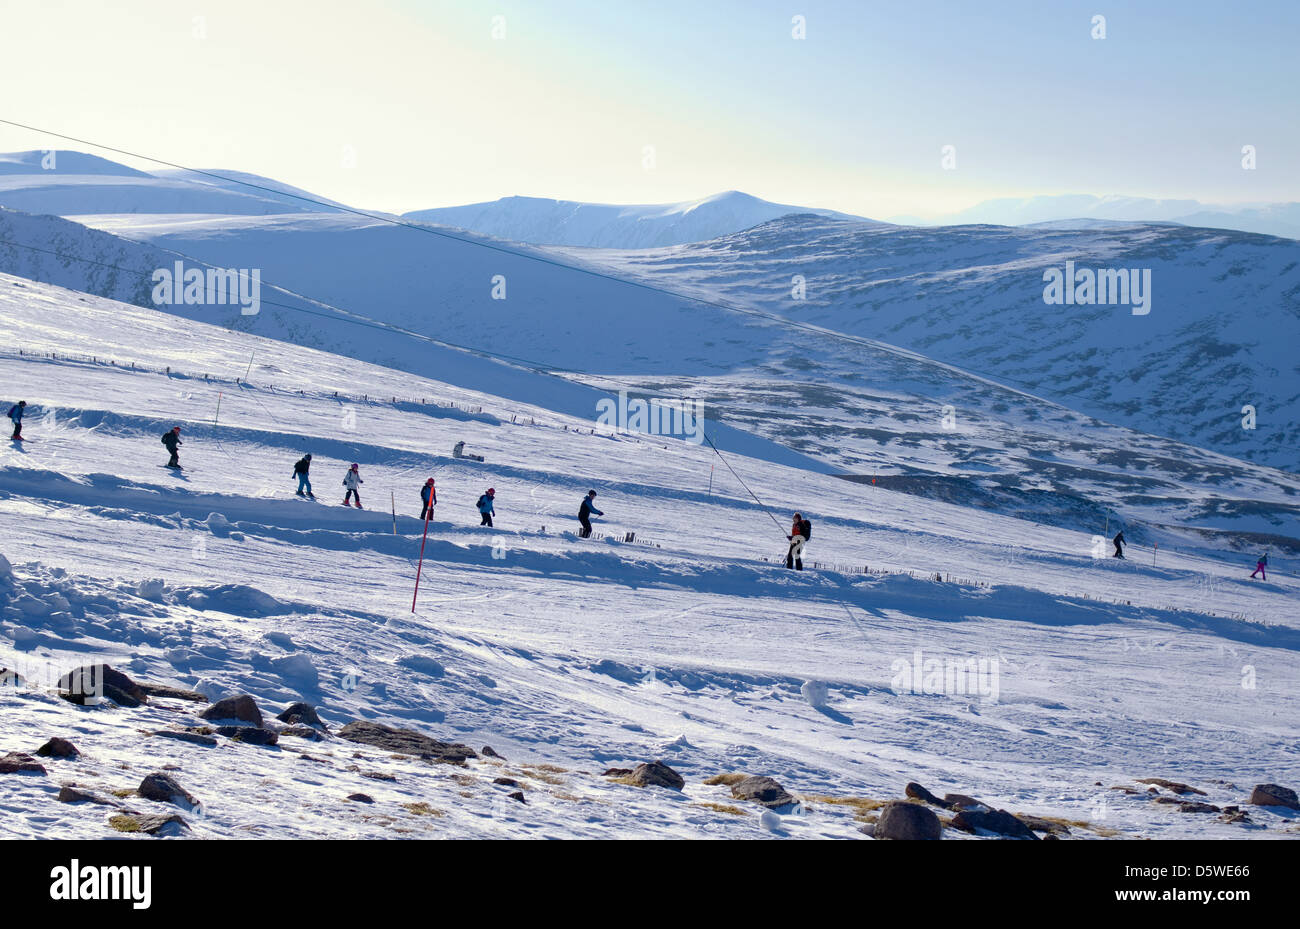 Skiers & snowboarders on tows and runs, seen from the Ptarmigan viewing terrace, Cairngorm Mountain Ski Centre Aviemore Scotland Stock Photo